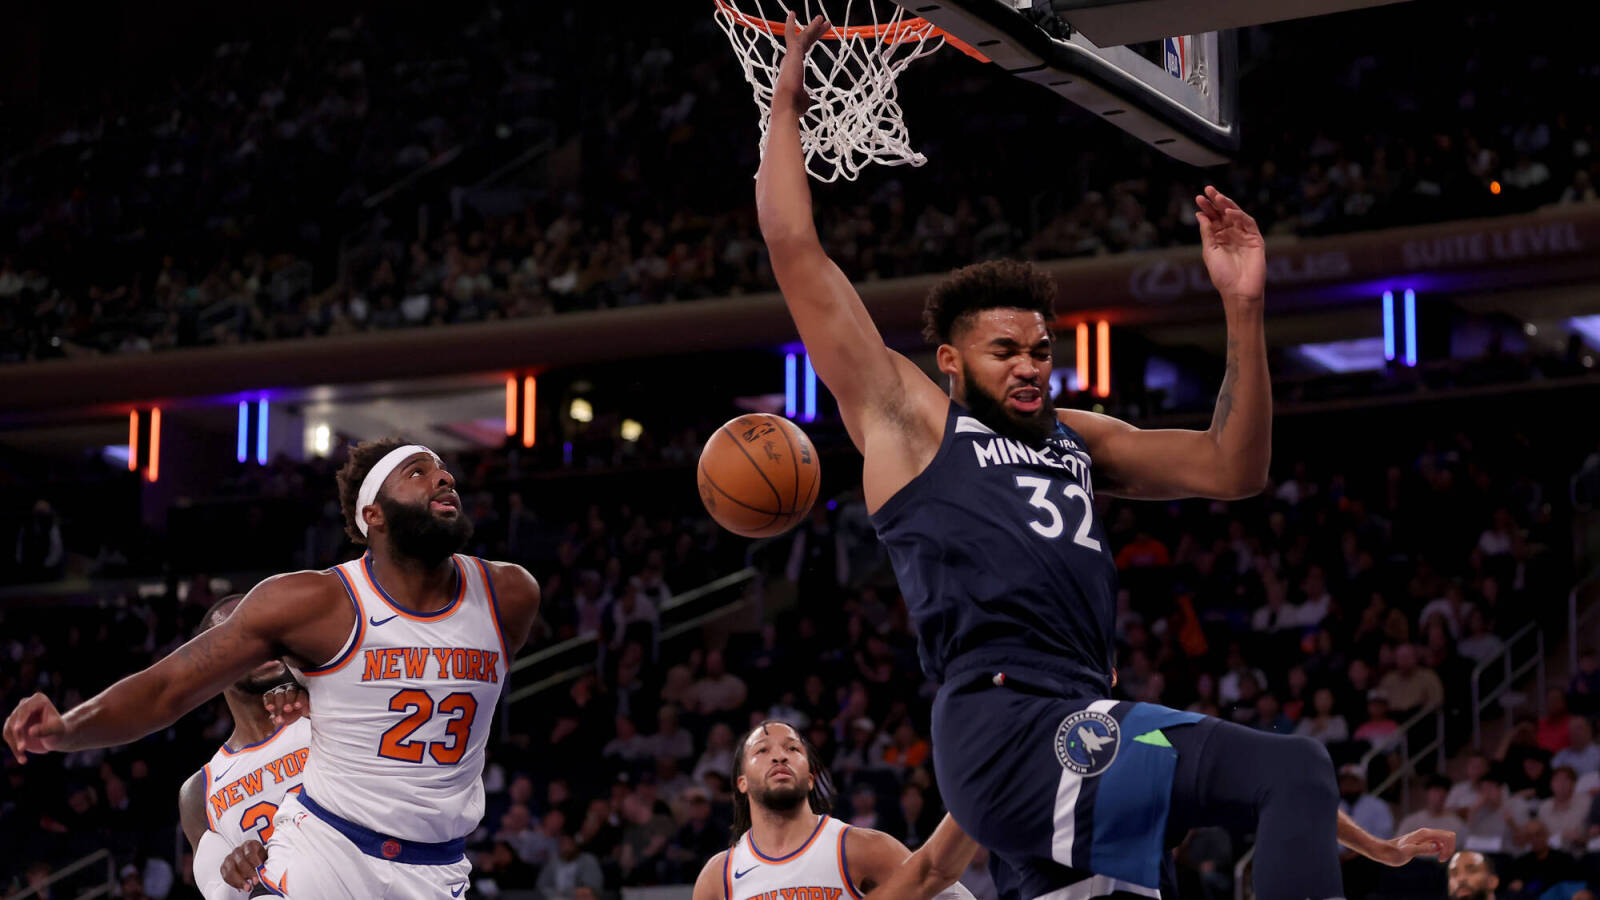 Former Timberwolves guard gushes over Karl-Anthony Towns: 'Wemby before Wemby'